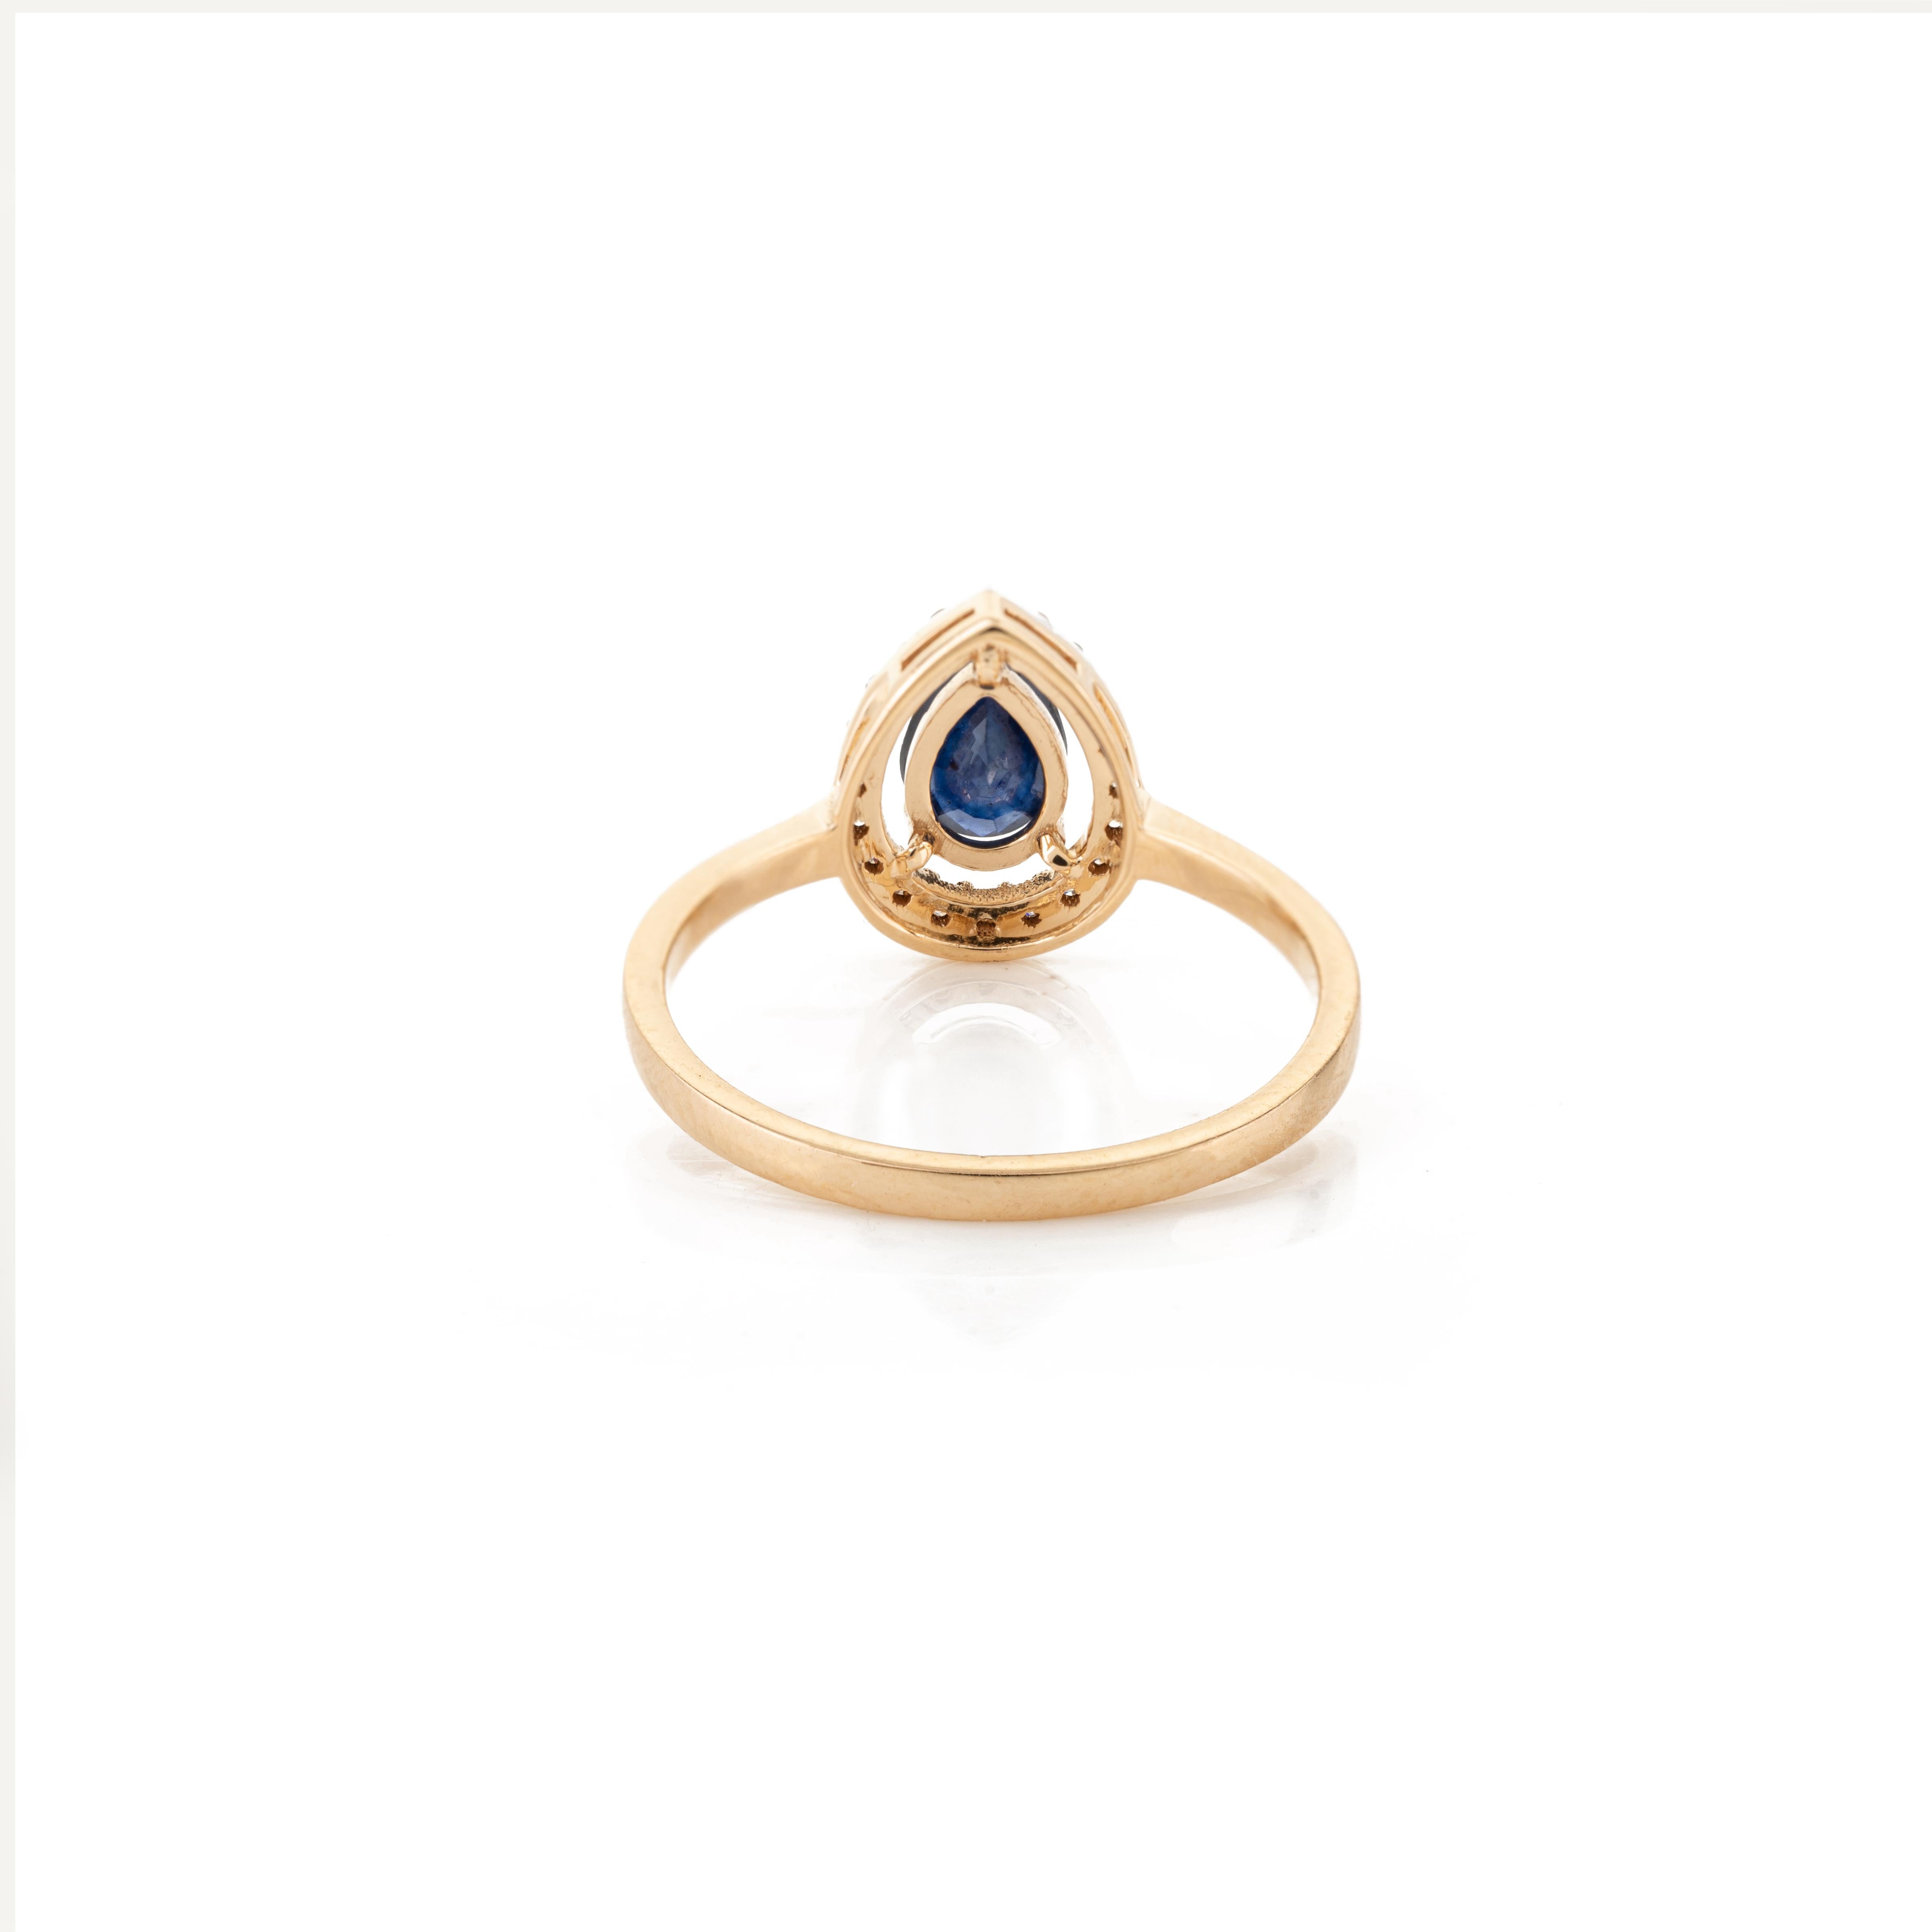 For Sale:  Pear Blue Sapphire Round Diamond Halo Engagement Ring Gift in 18k Yellow Gold 6